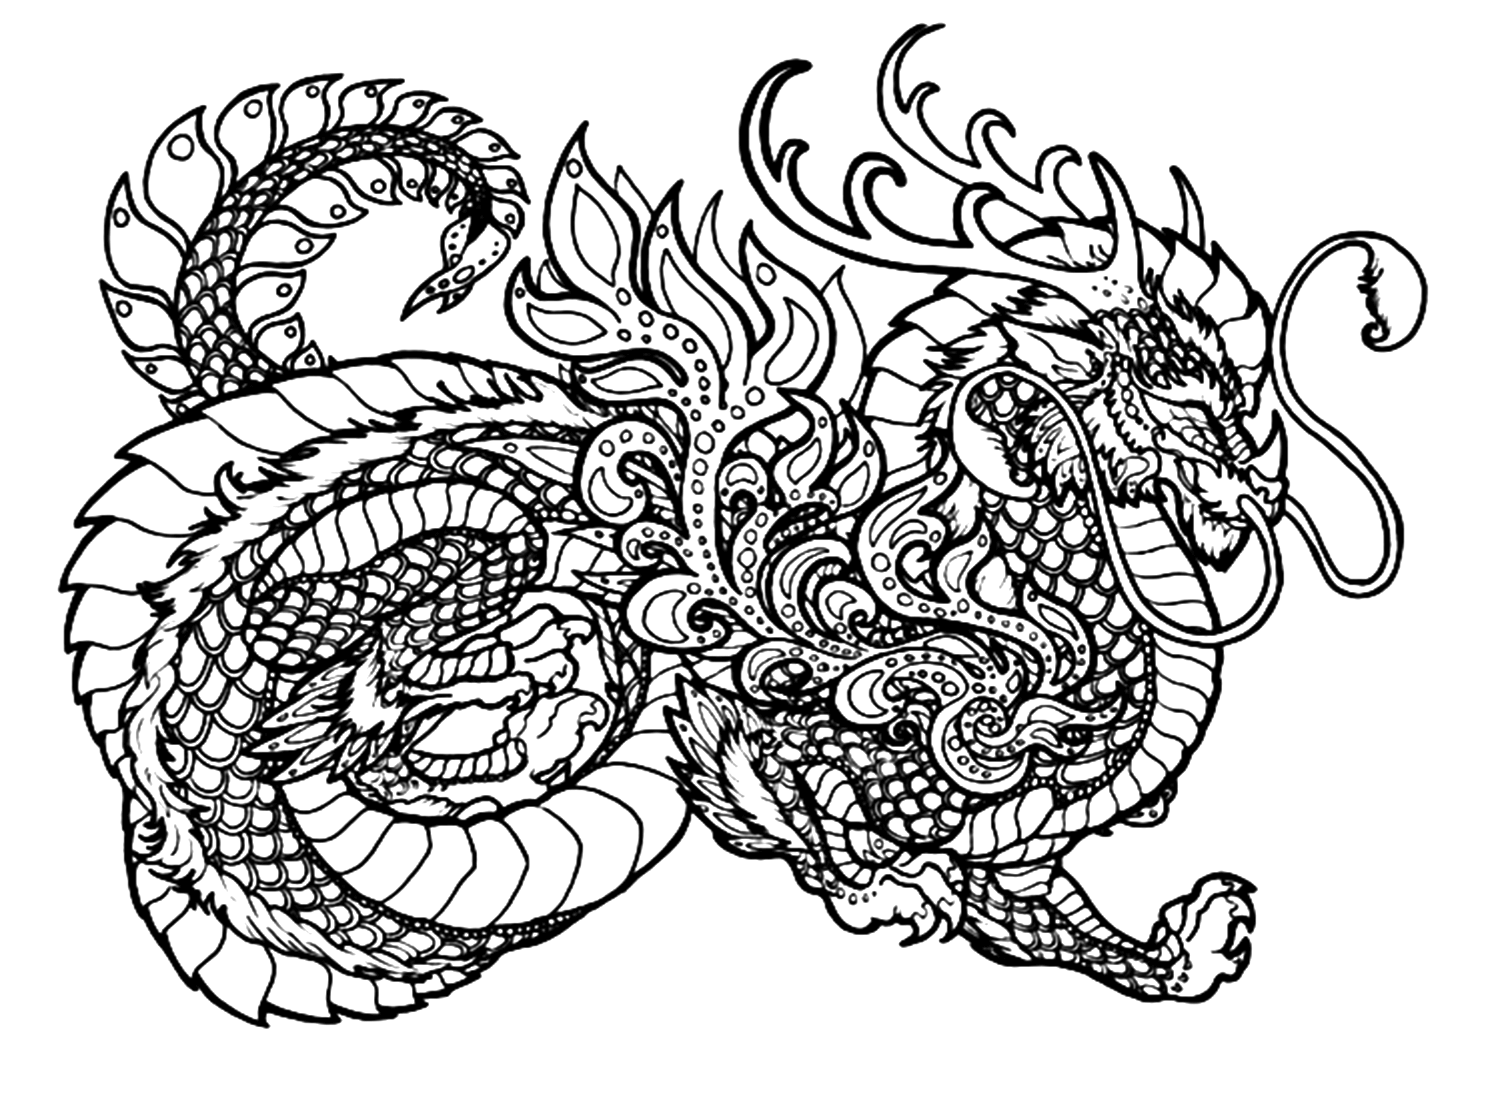 Dragons Preschool Coloring Pages